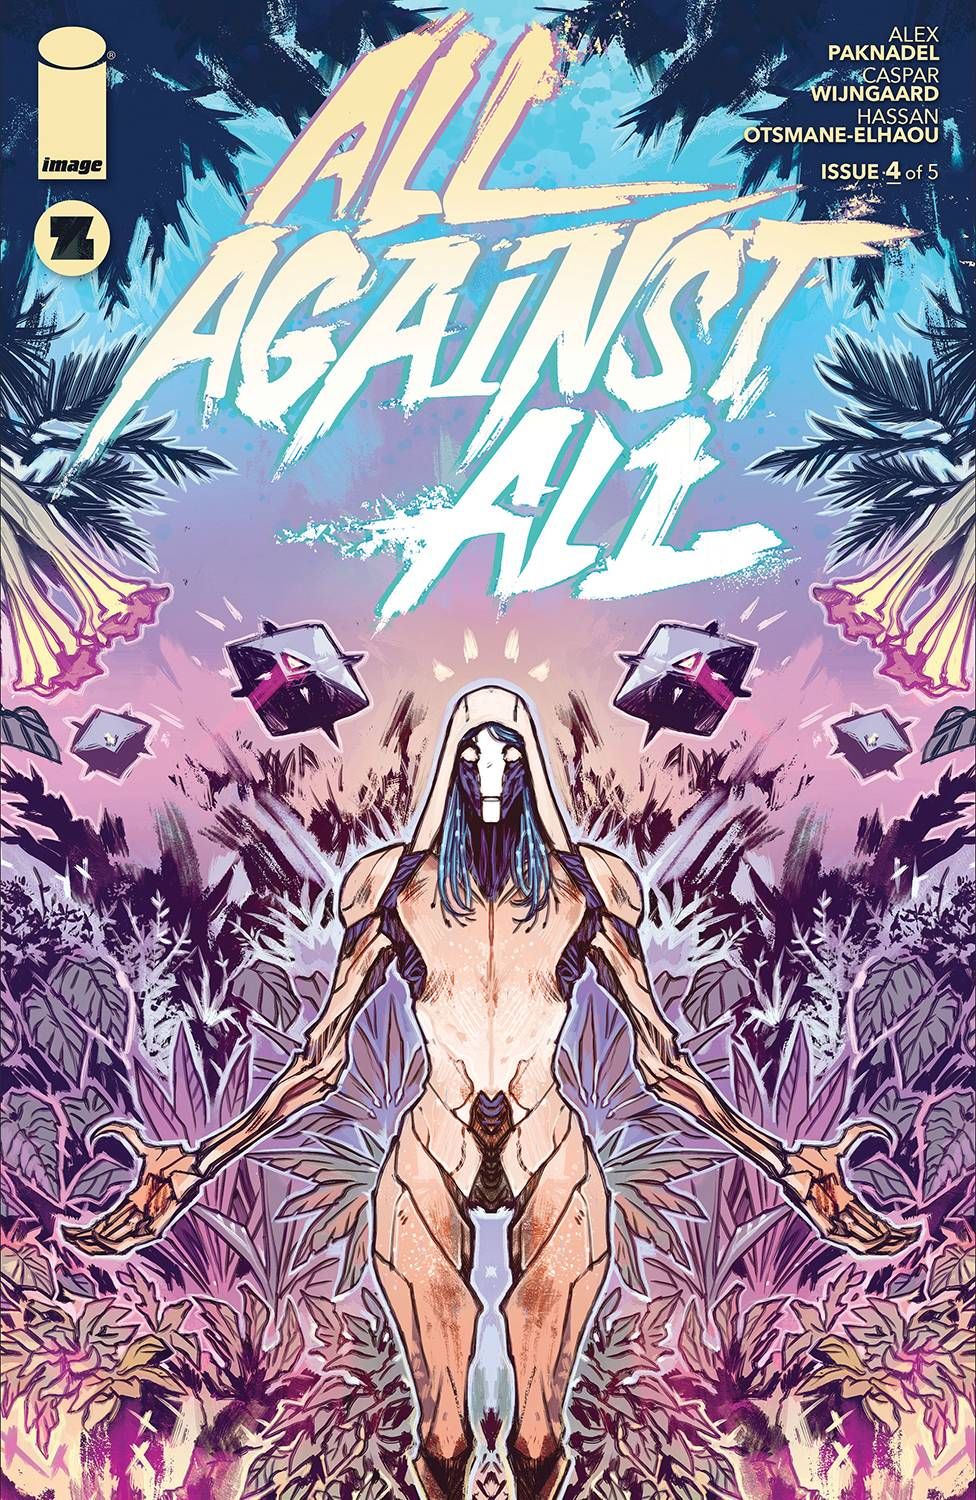 All Against All #4 Comic